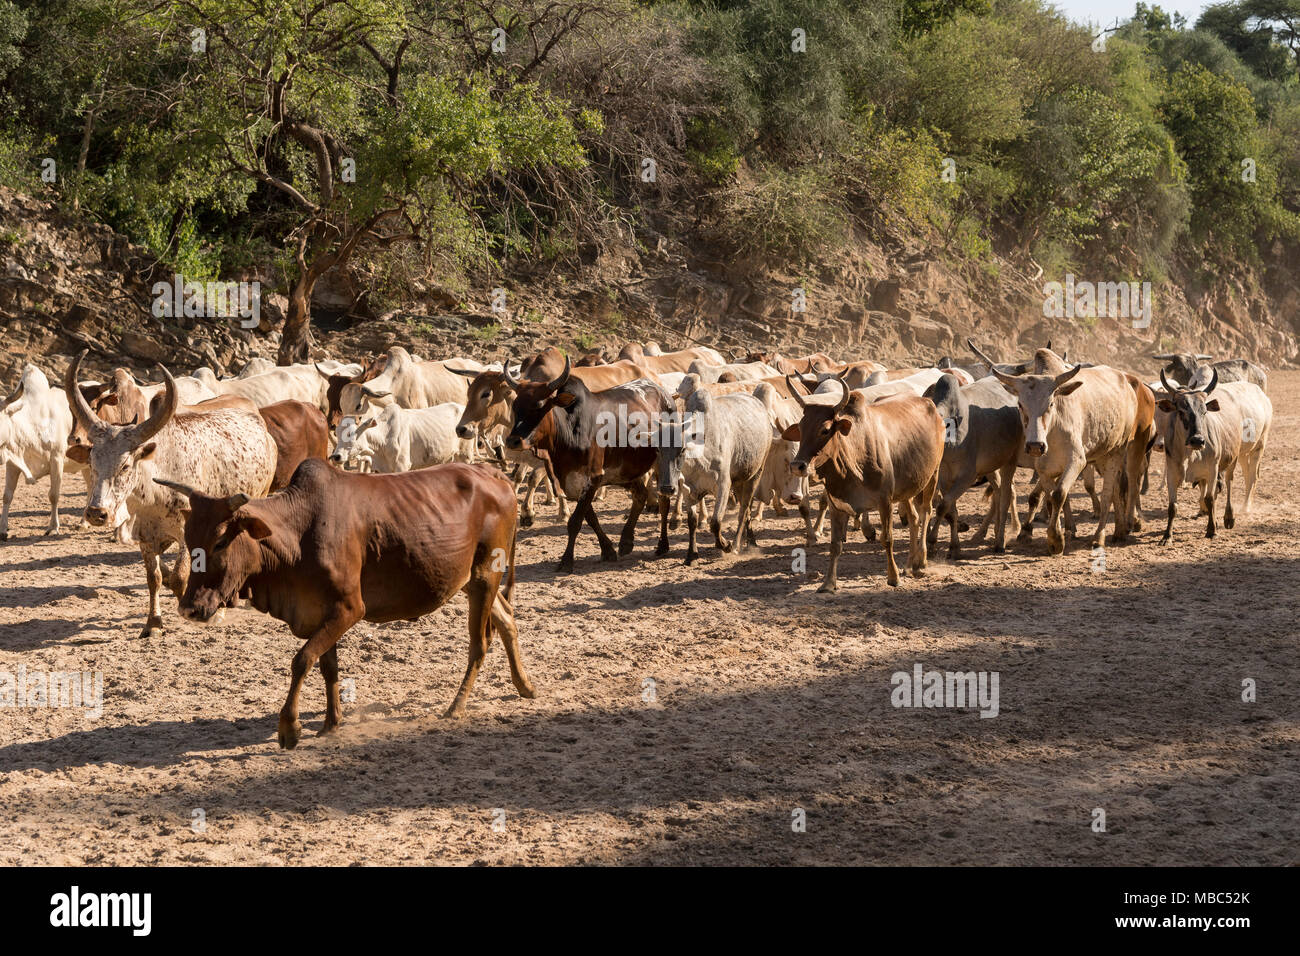 Cattle herd of the Hamer runs in dry river, near Turmi, Southern Nations Nationalities and Peoples' Region, Ethiopia Stock Photo